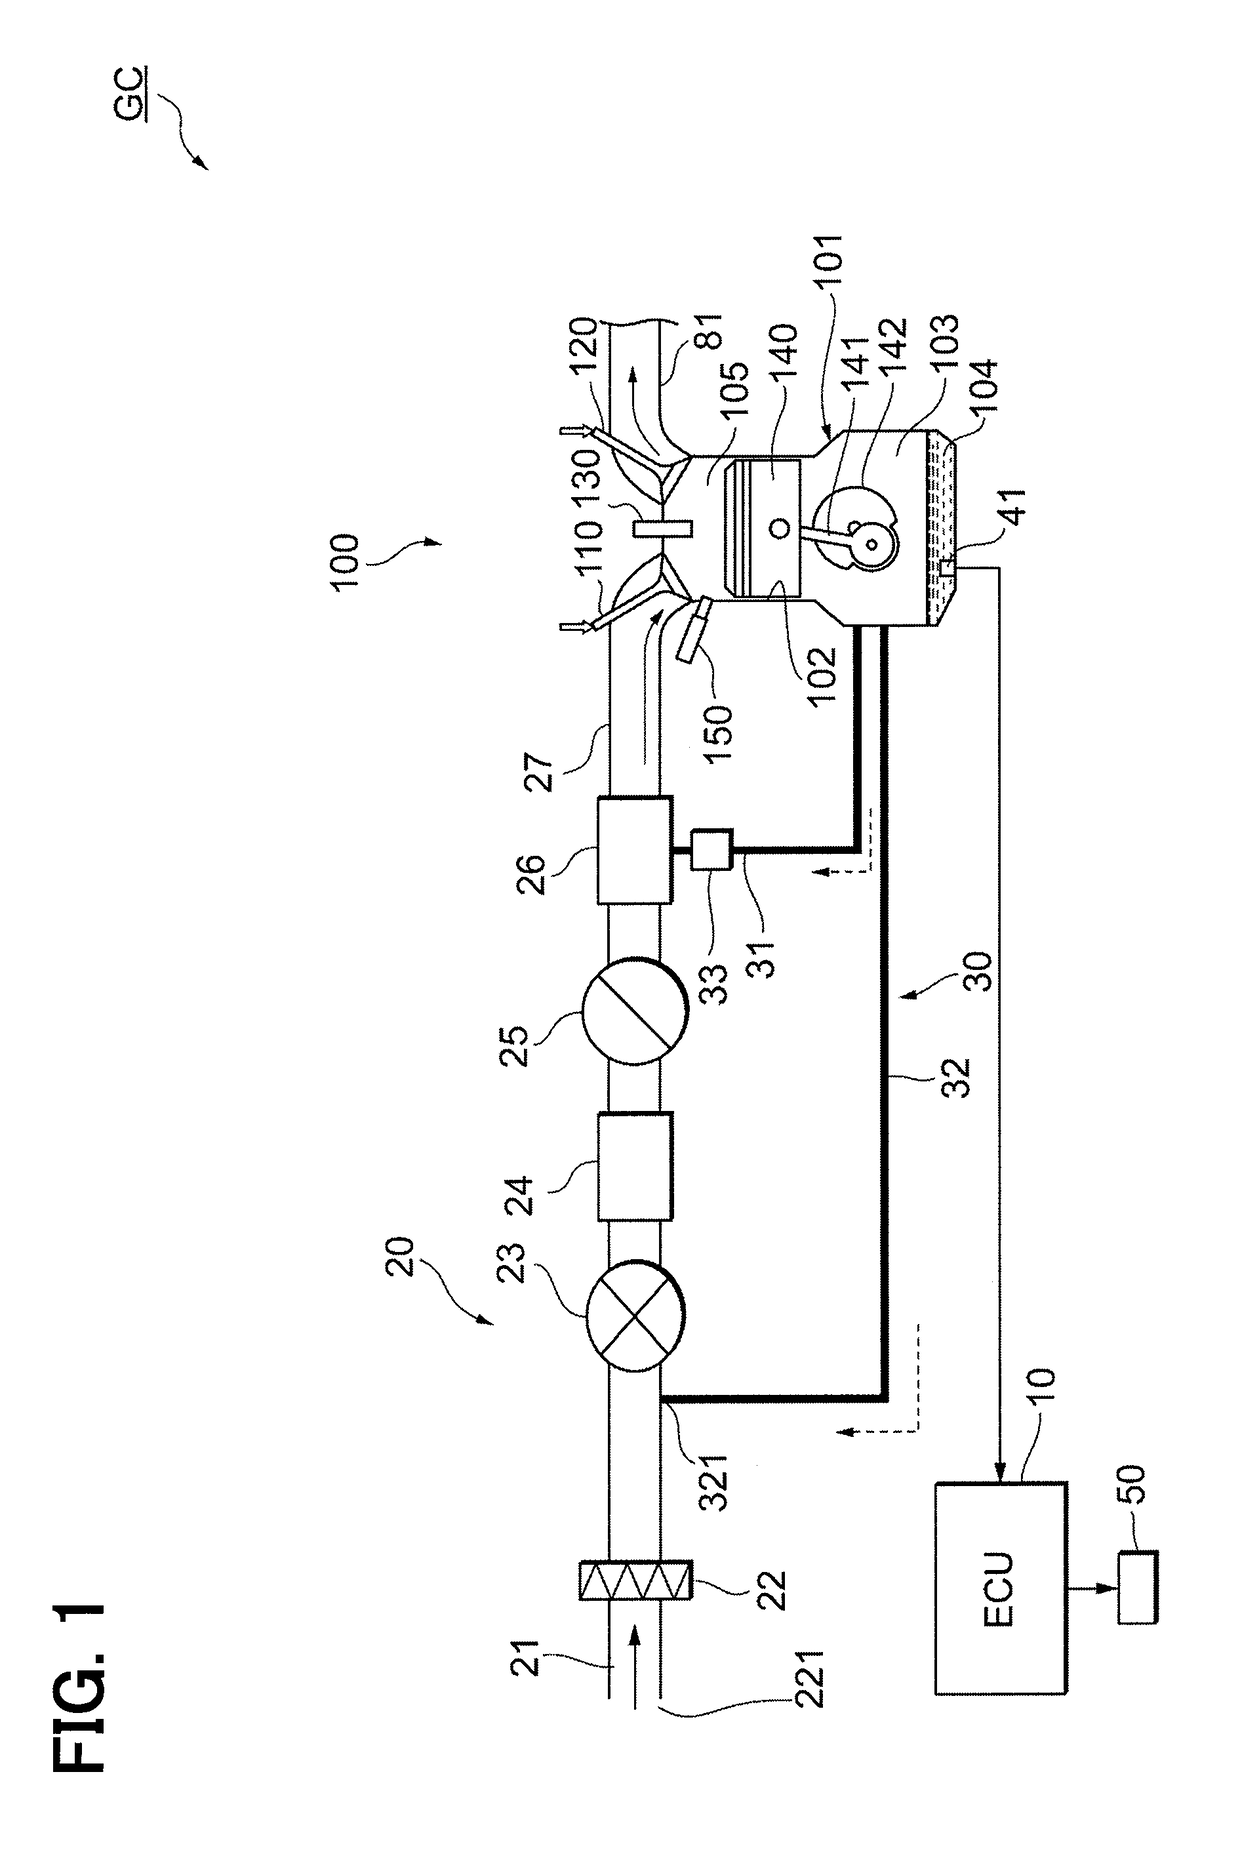 Fault detection device for internal combustion engine